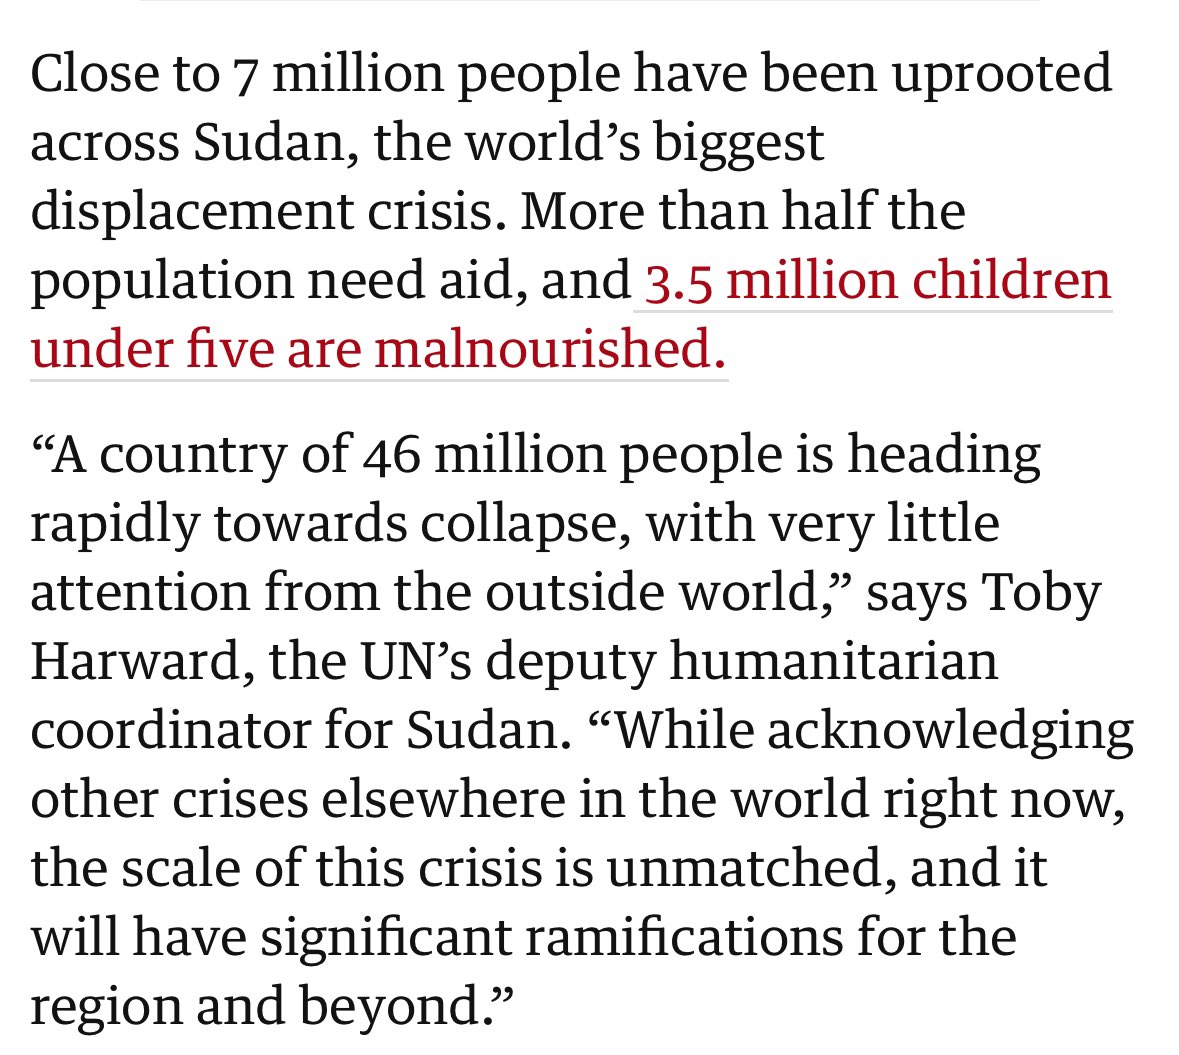 Informative overview of the year’s catastrophes in Sudan — mass rape, 7 million displaced, 3.5 million malnourished kids, ethnic cleansing ongoing. amp.theguardian.com/global-develop…